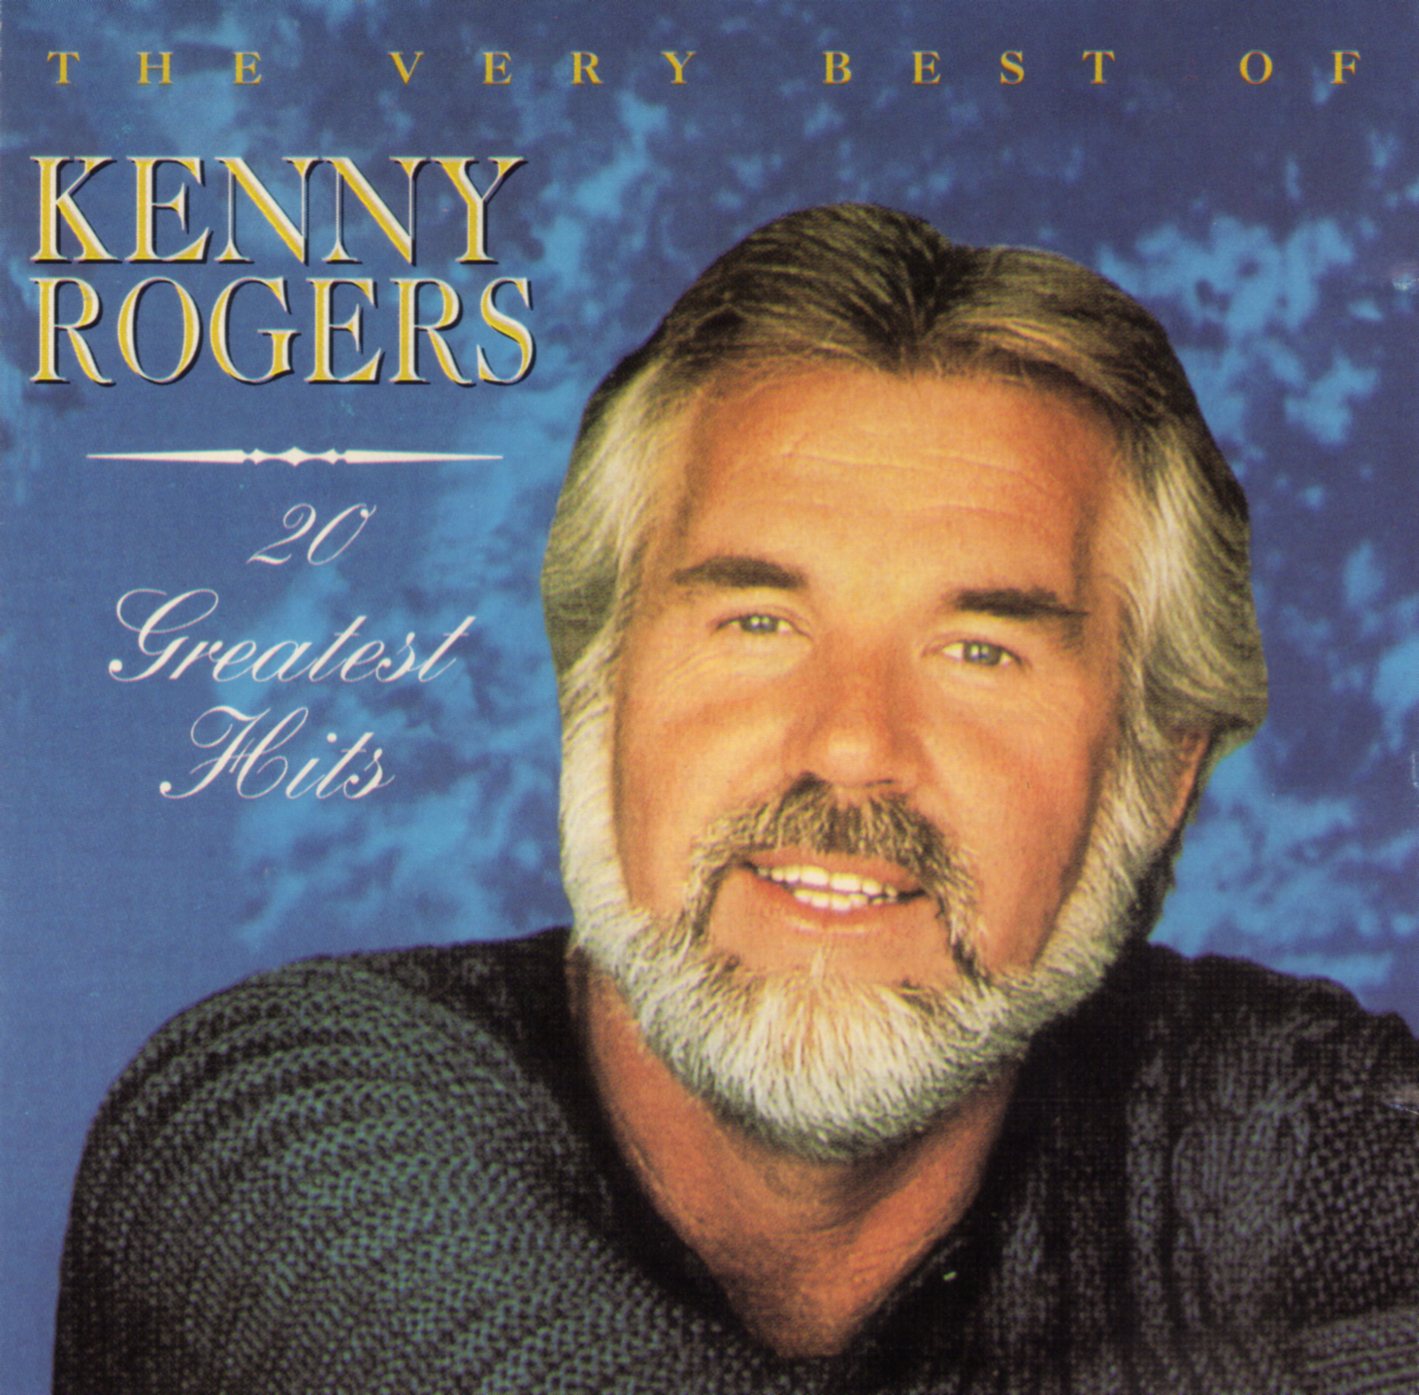 kenny rogers discography blogspot